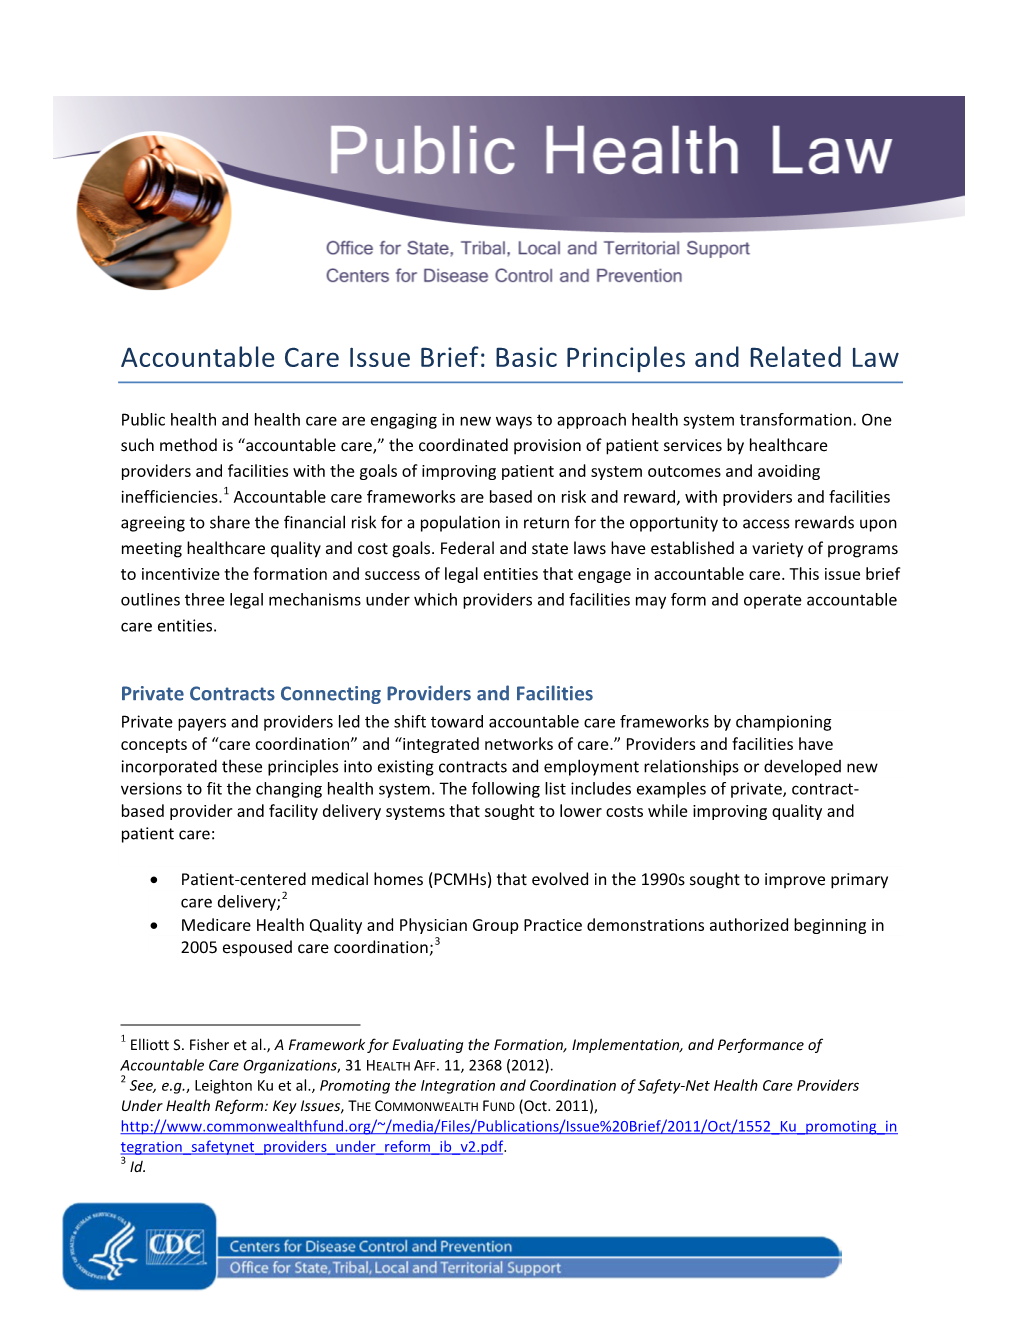 Accountable Care Issue Brief: Basic Principles and Related Law